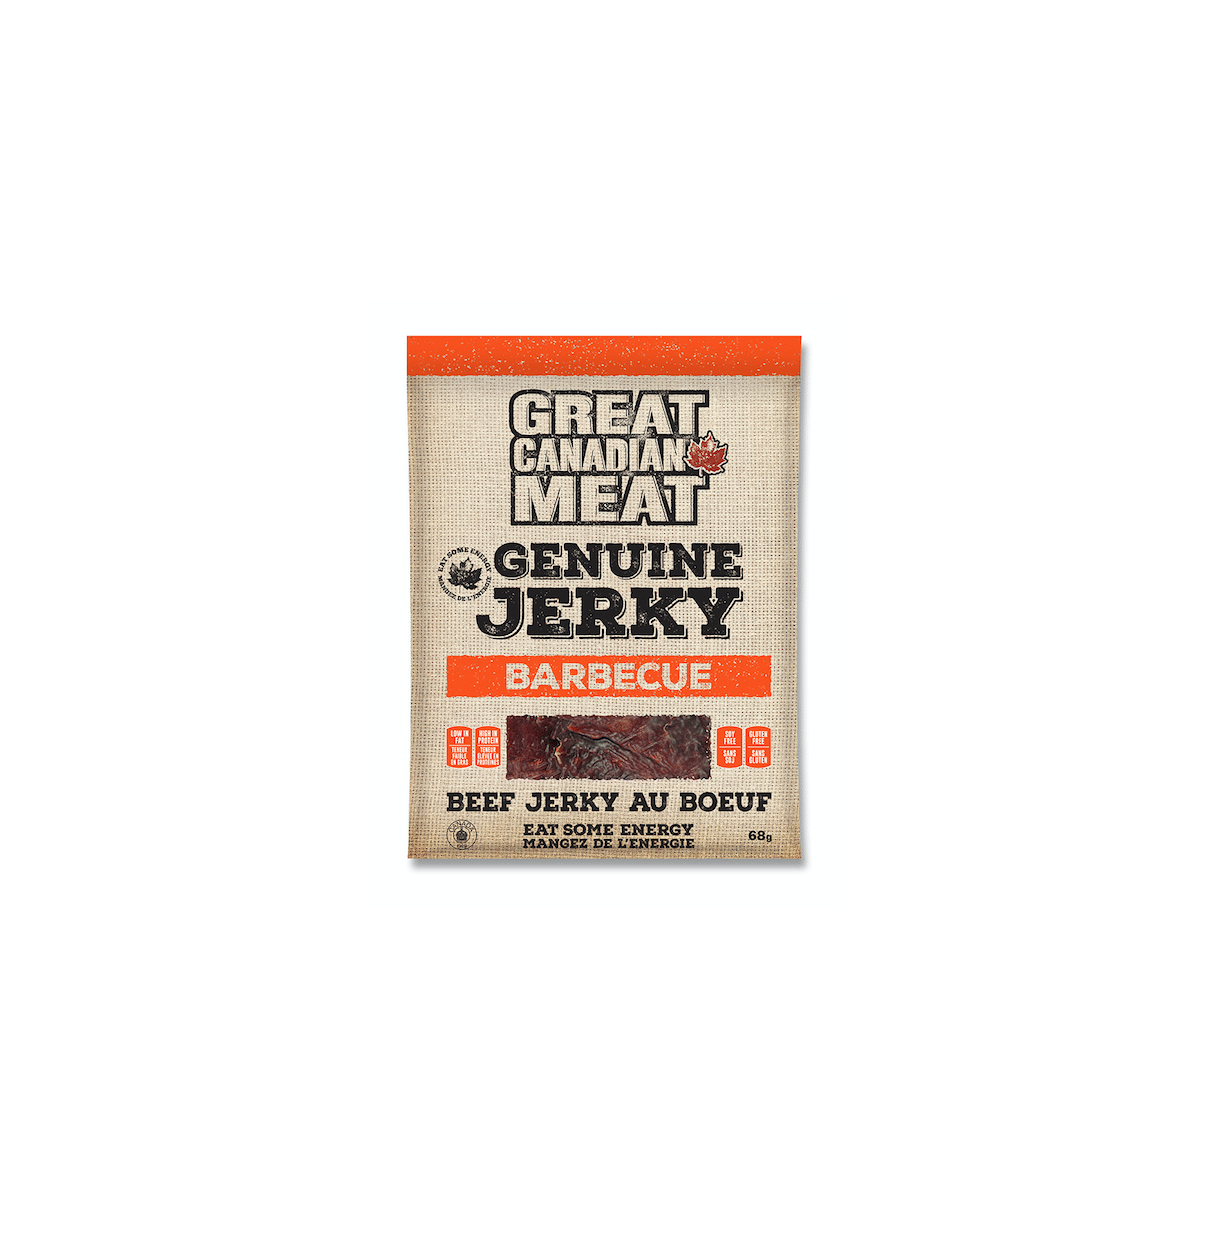 Barbecue Beef Jerky (Great Canadian Meat)_3_cc